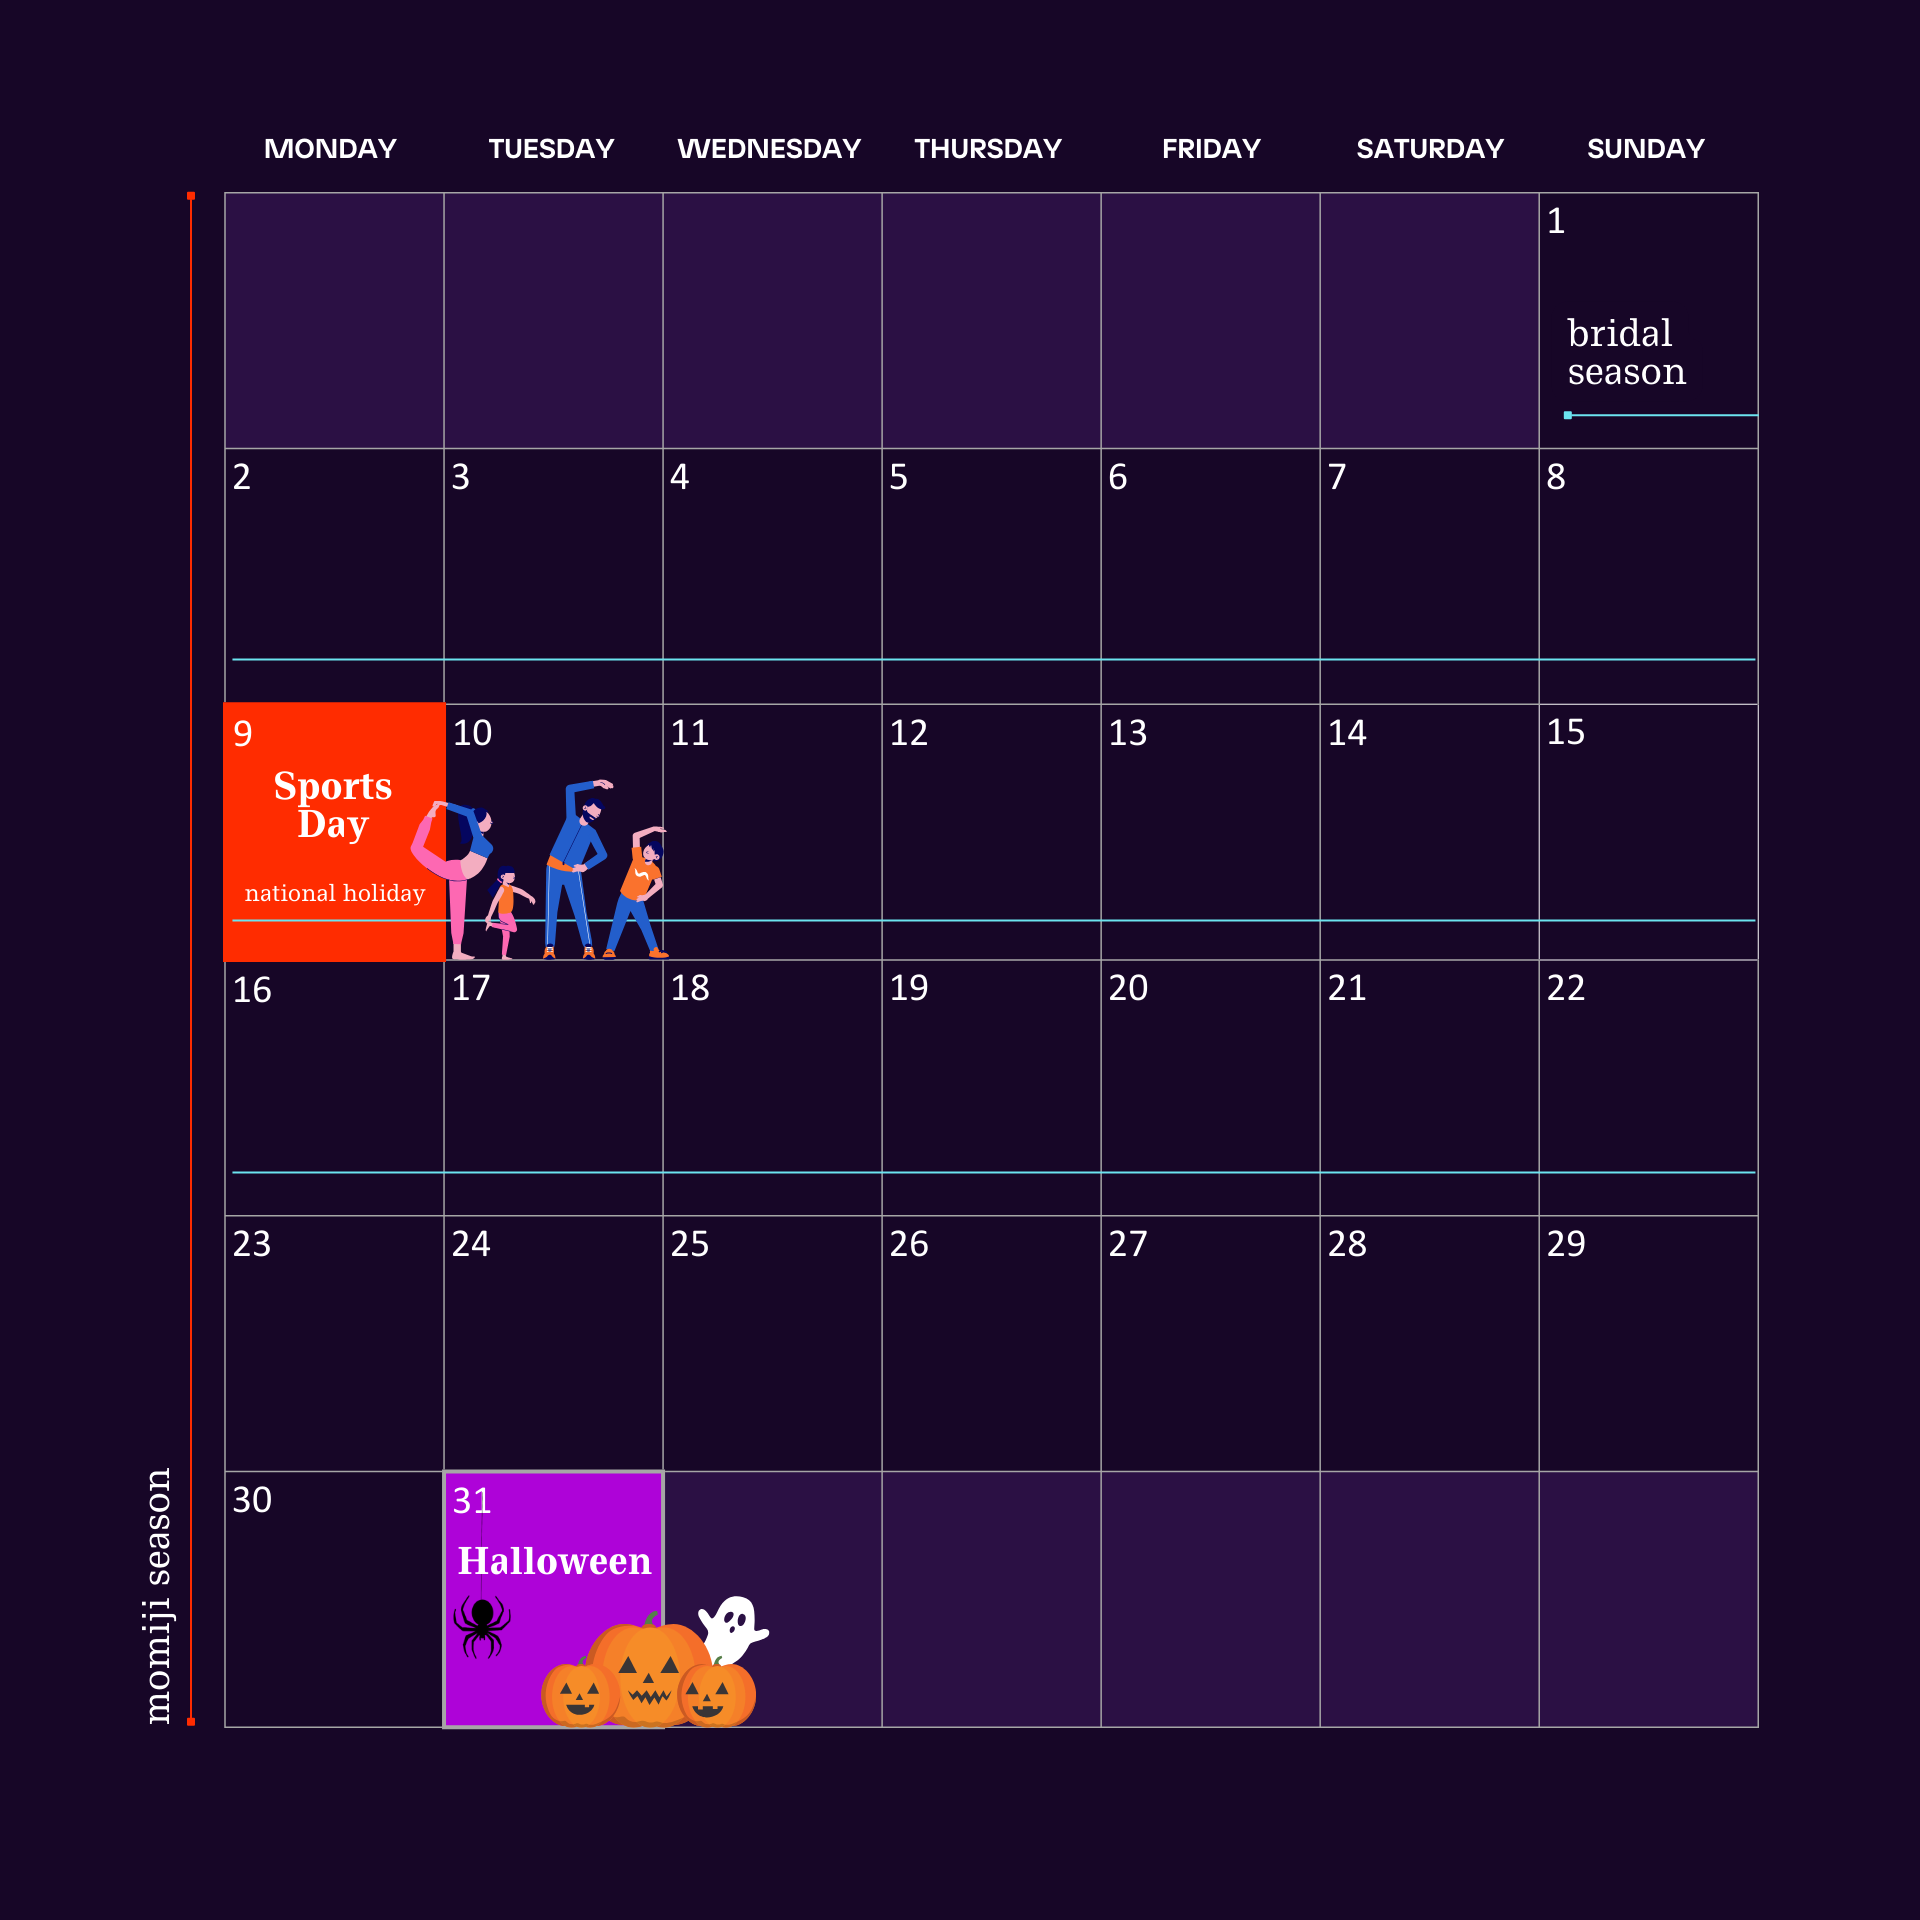 This is an image of October calendar with important dates like Sports Day and halloween